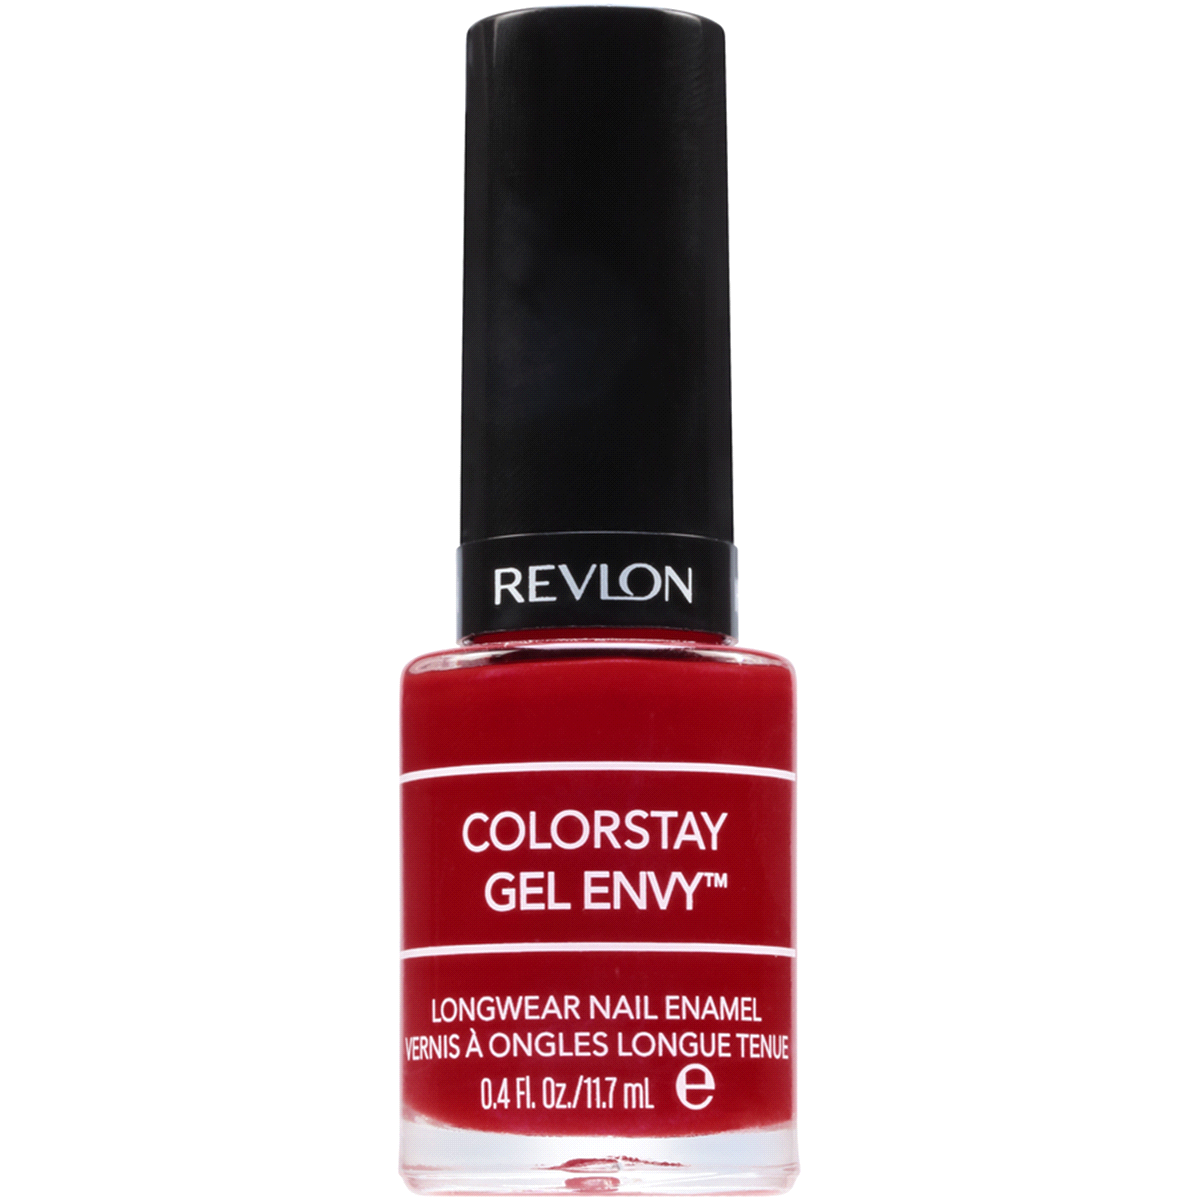 Looking for a dupe for Revlon Wild Card? : r/RedditLaqueristas